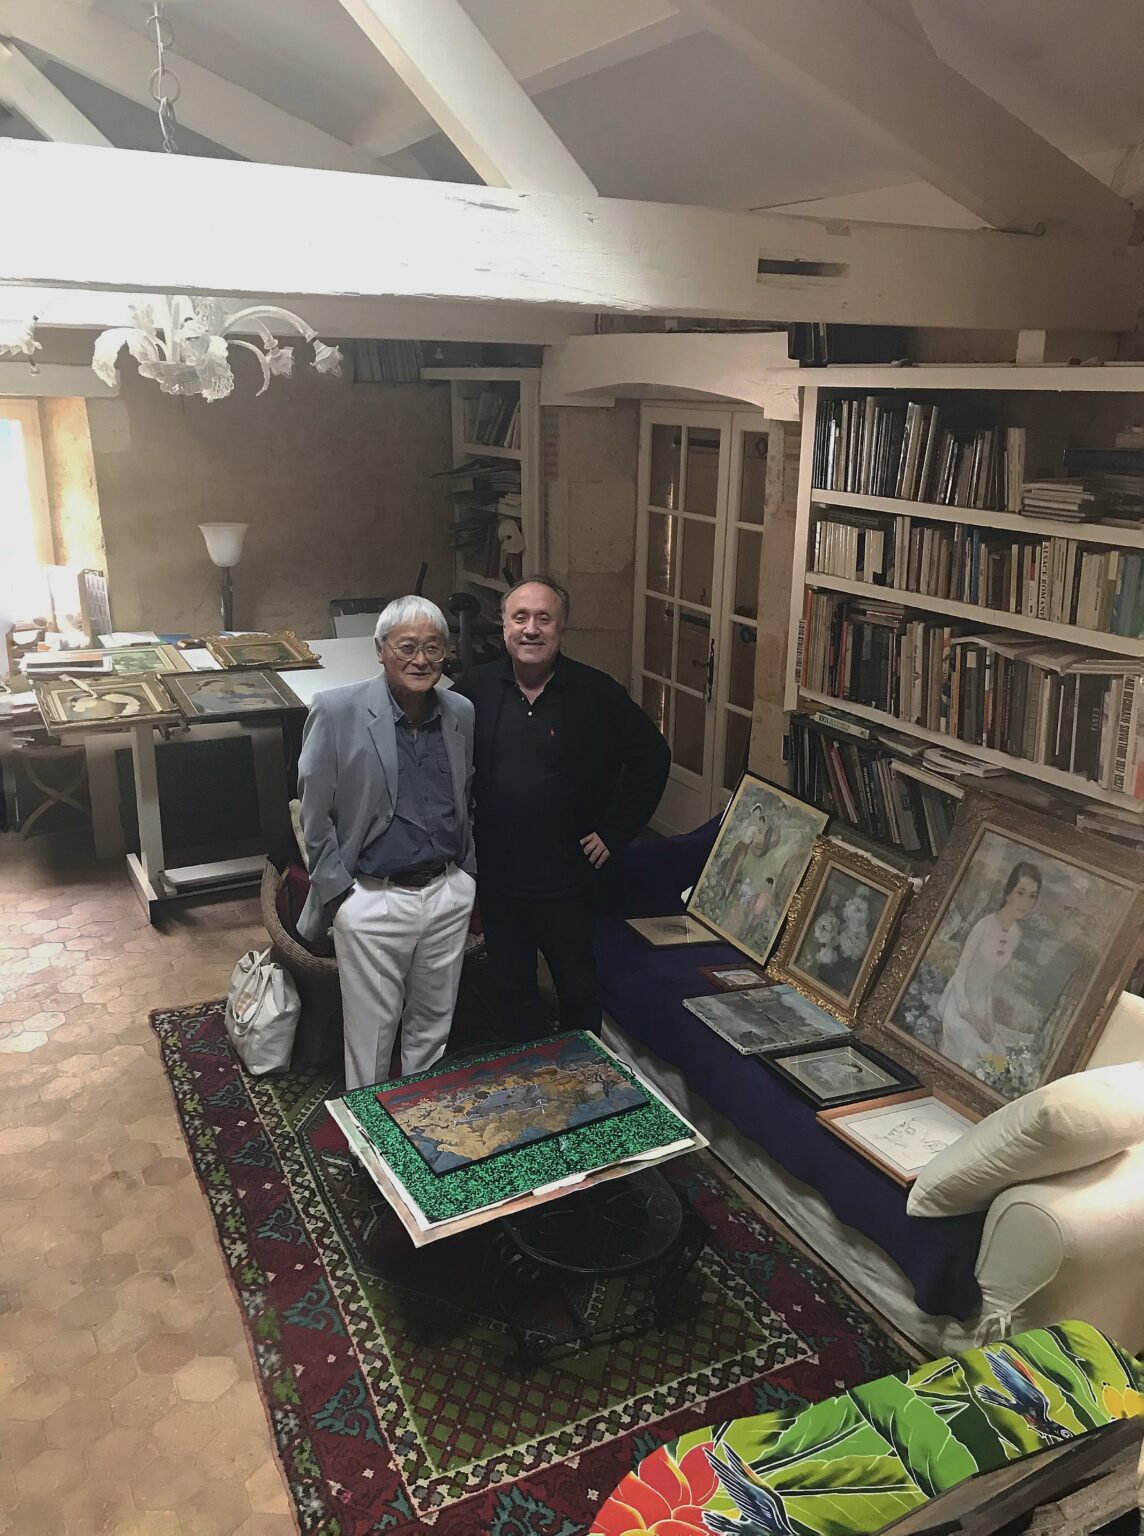 Ngo Manh Duc (B. 1941), son of Le Thi Luu (Vietnamese, 1911-1988) and Mr Jean-François Hubert, Christie’s Senior Expert, Vietnamese Art along with Le Thi Luu’s masterpieces at Ngo Manh Duc’s home. Paintings presented at Christie’s auction sale The Ngo Manh Duc Collection or The Homage of a Son to His Mother, Hong Kong, November 24, 2019.